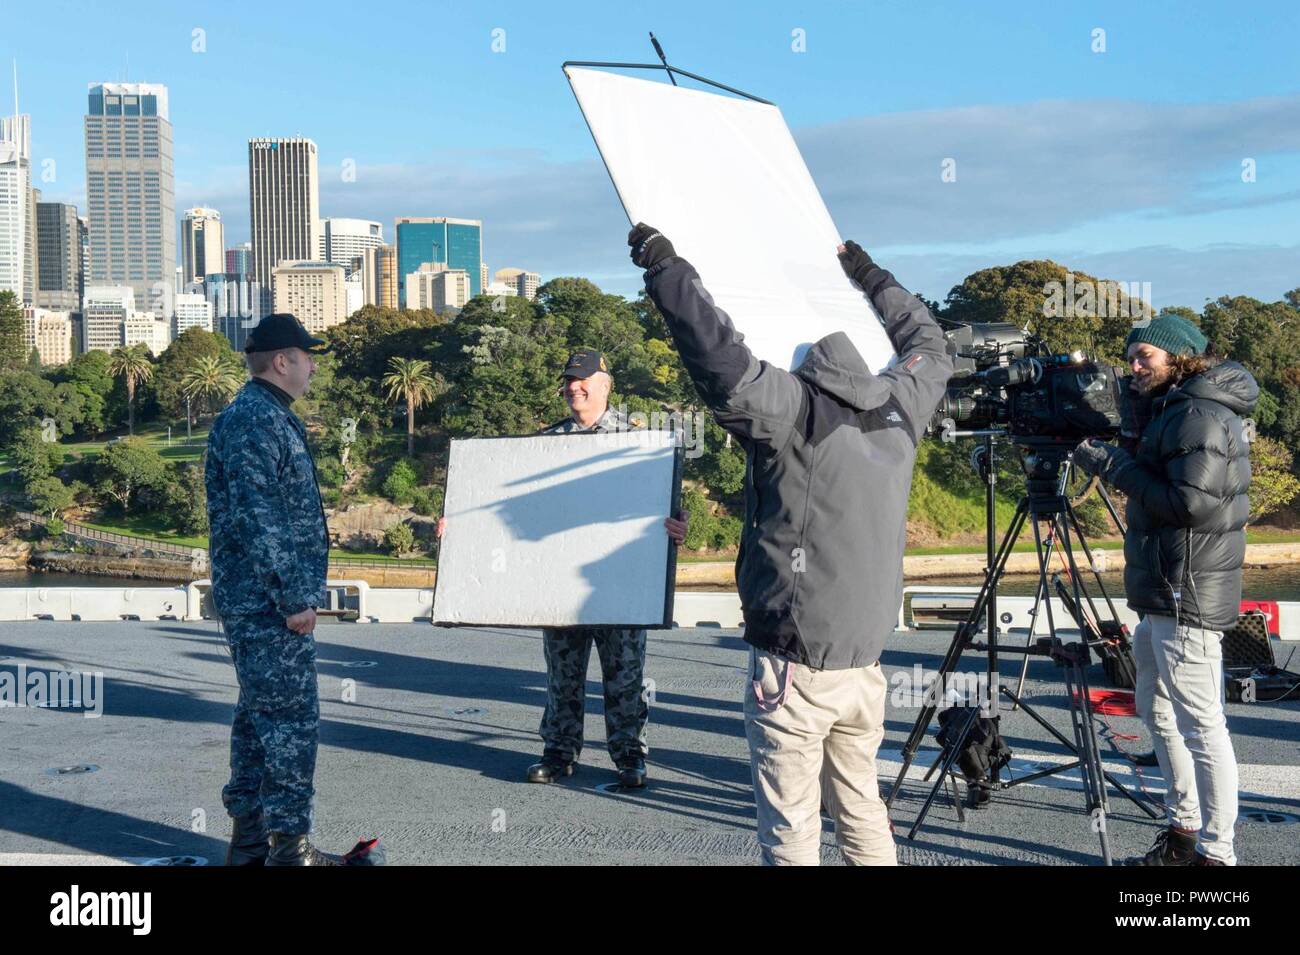 https://c8.alamy.com/comp/PWWCH6/sydney-july-1-2017-capt-larry-mccullen-commanding-officer-of-the-amphibious-assault-ship-uss-bonhomme-richard-lhd-6-speaks-with-the-hosts-of-9news-an-australian-television-morning-show-from-the-ships-flight-deck-during-a-live-broadcast-bonhomme-richard-made-a-port-call-to-sydney-as-part-of-talisman-saber-2017-which-is-a-biennial-us-australia-bilateral-military-exercise-that-combines-a-field-training-exercise-and-command-post-exercise-to-strengthen-interoperability-and-response-capabilities-to-uphold-the-tenets-of-the-us-australian-alliance-PWWCH6.jpg